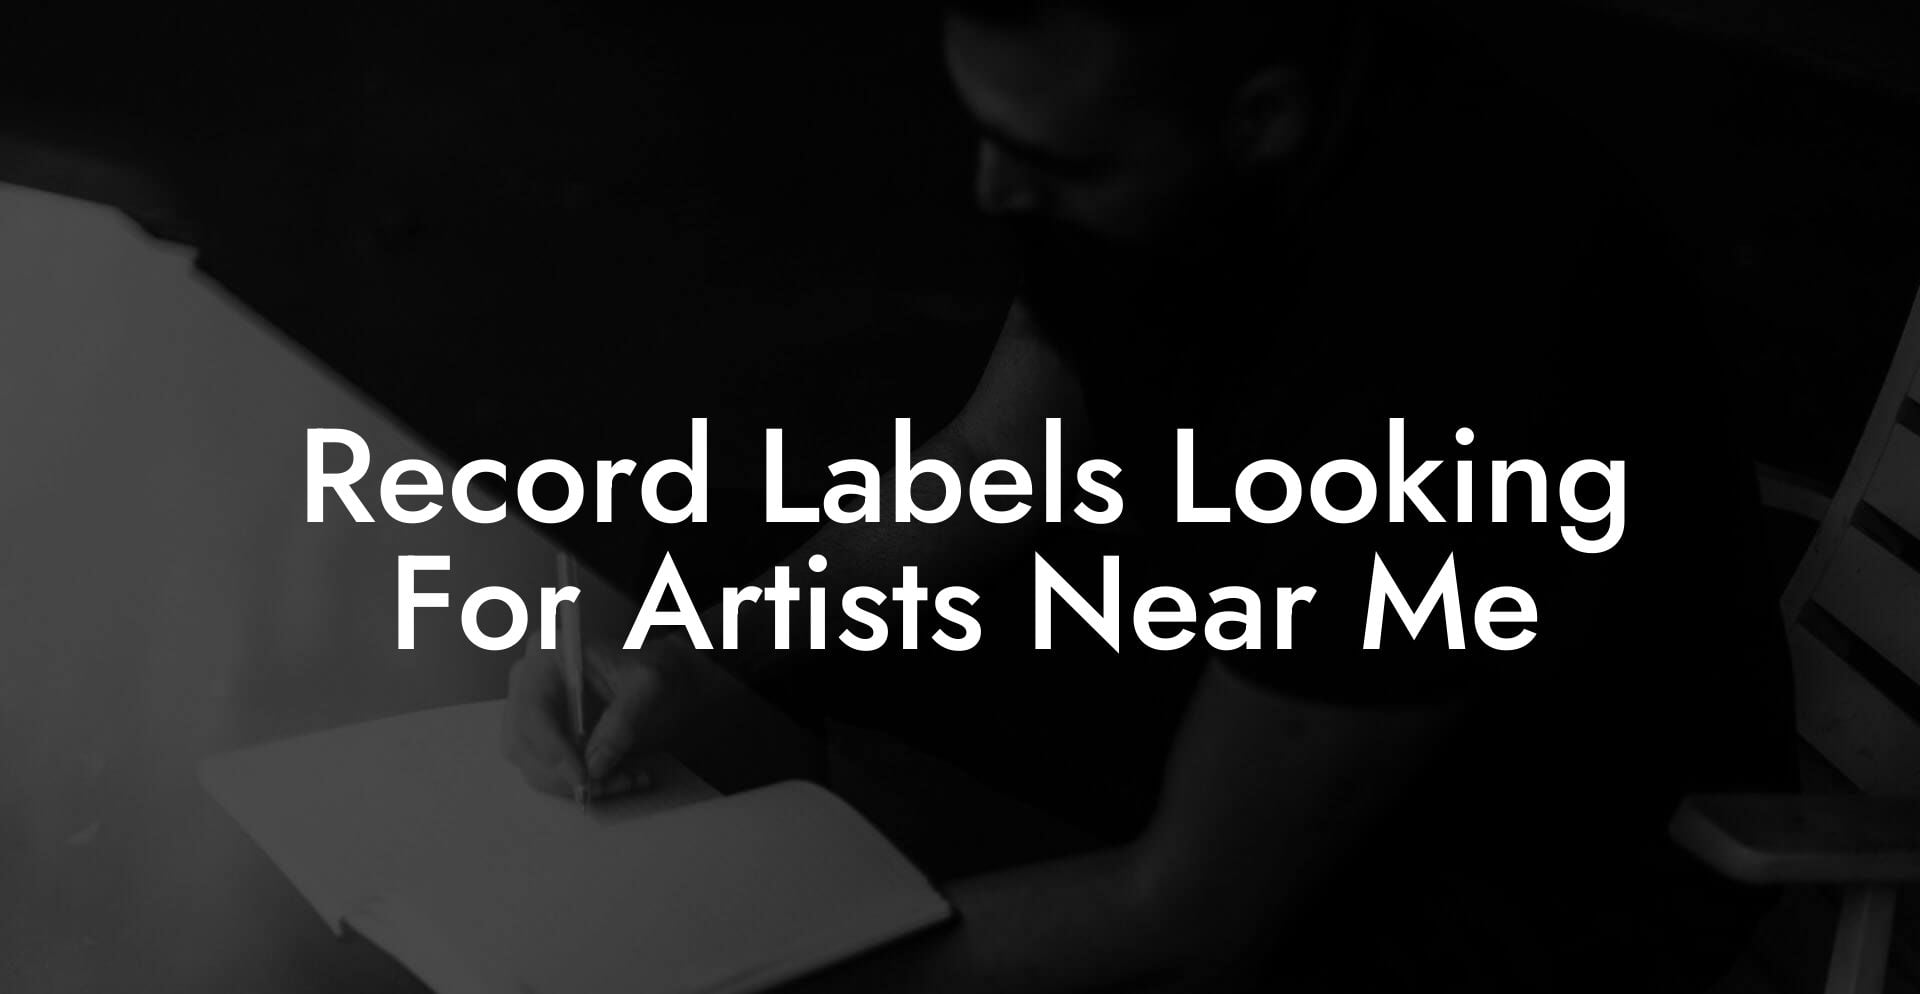 Record Labels Looking For Artists Near Me